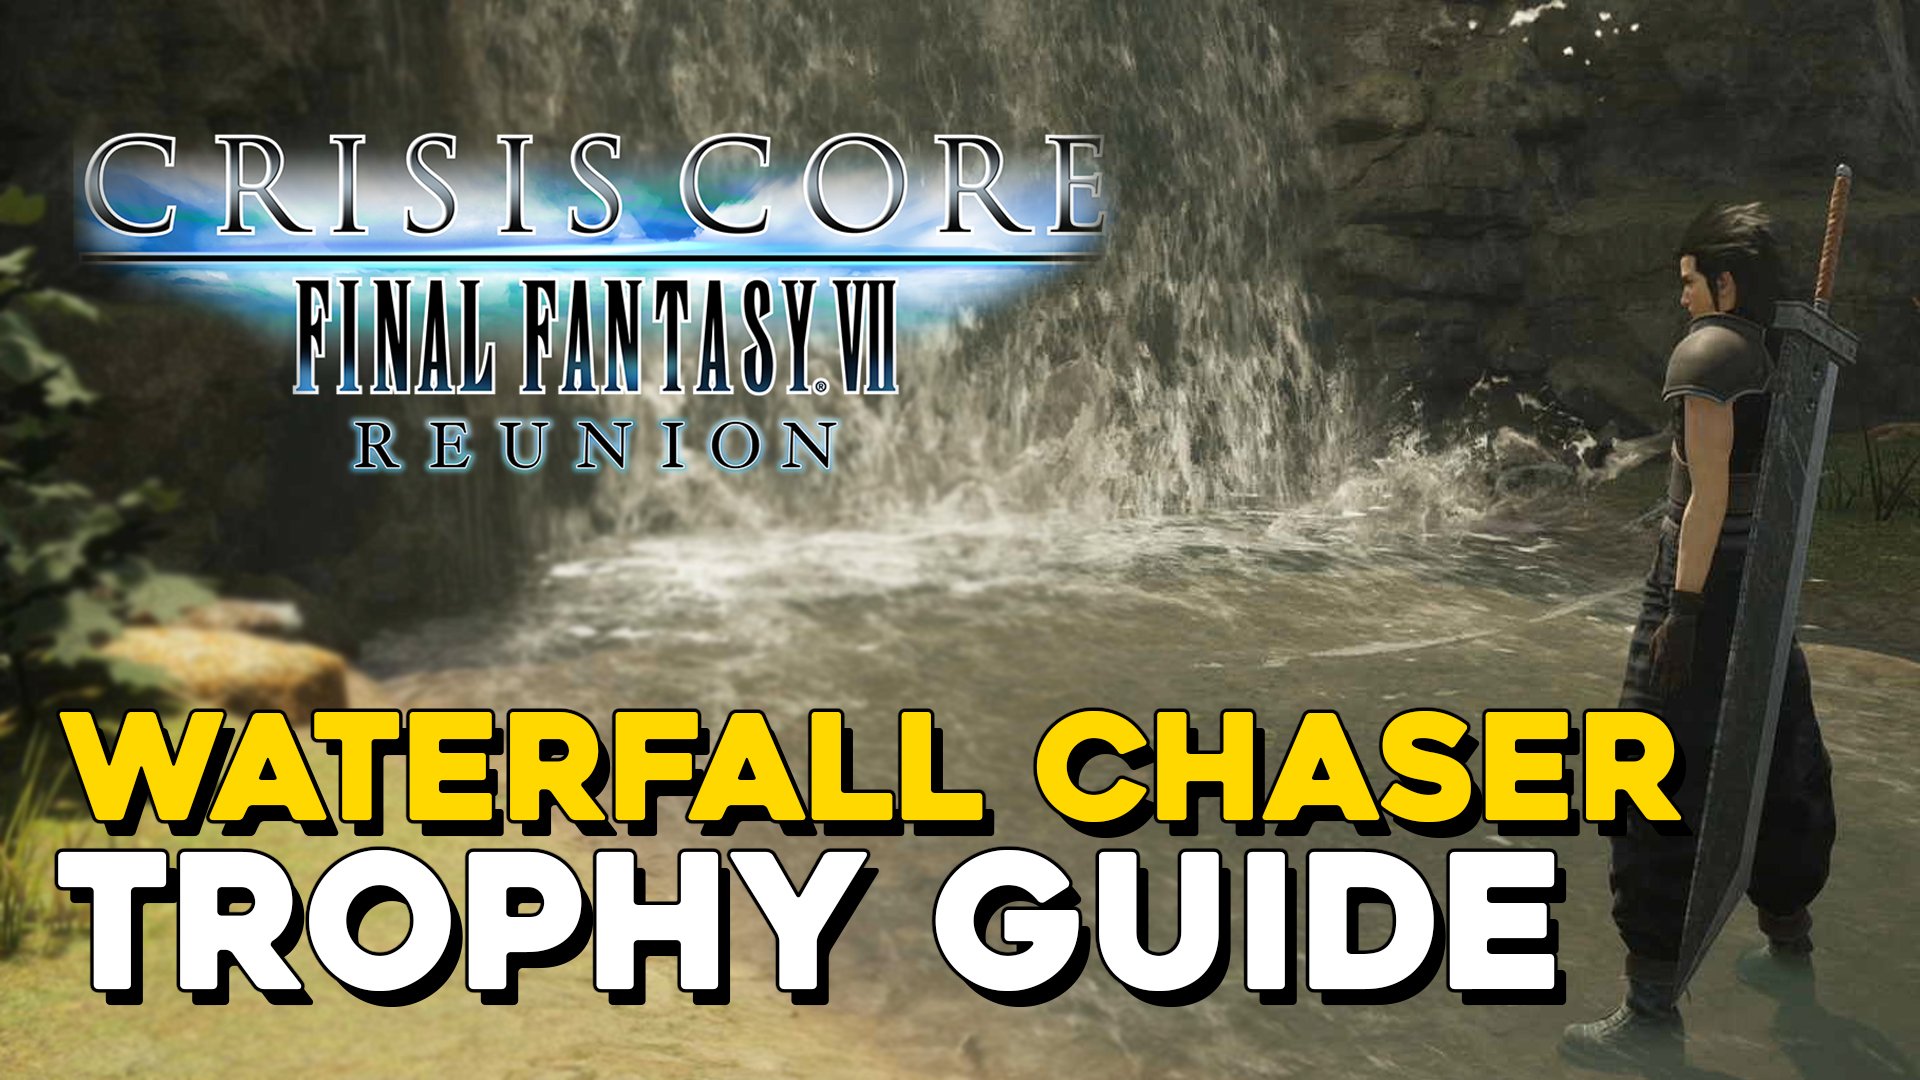 Crisis Core Final Fantasy 7 Reunion Waterfall Chaser Trophy Guide.jpg